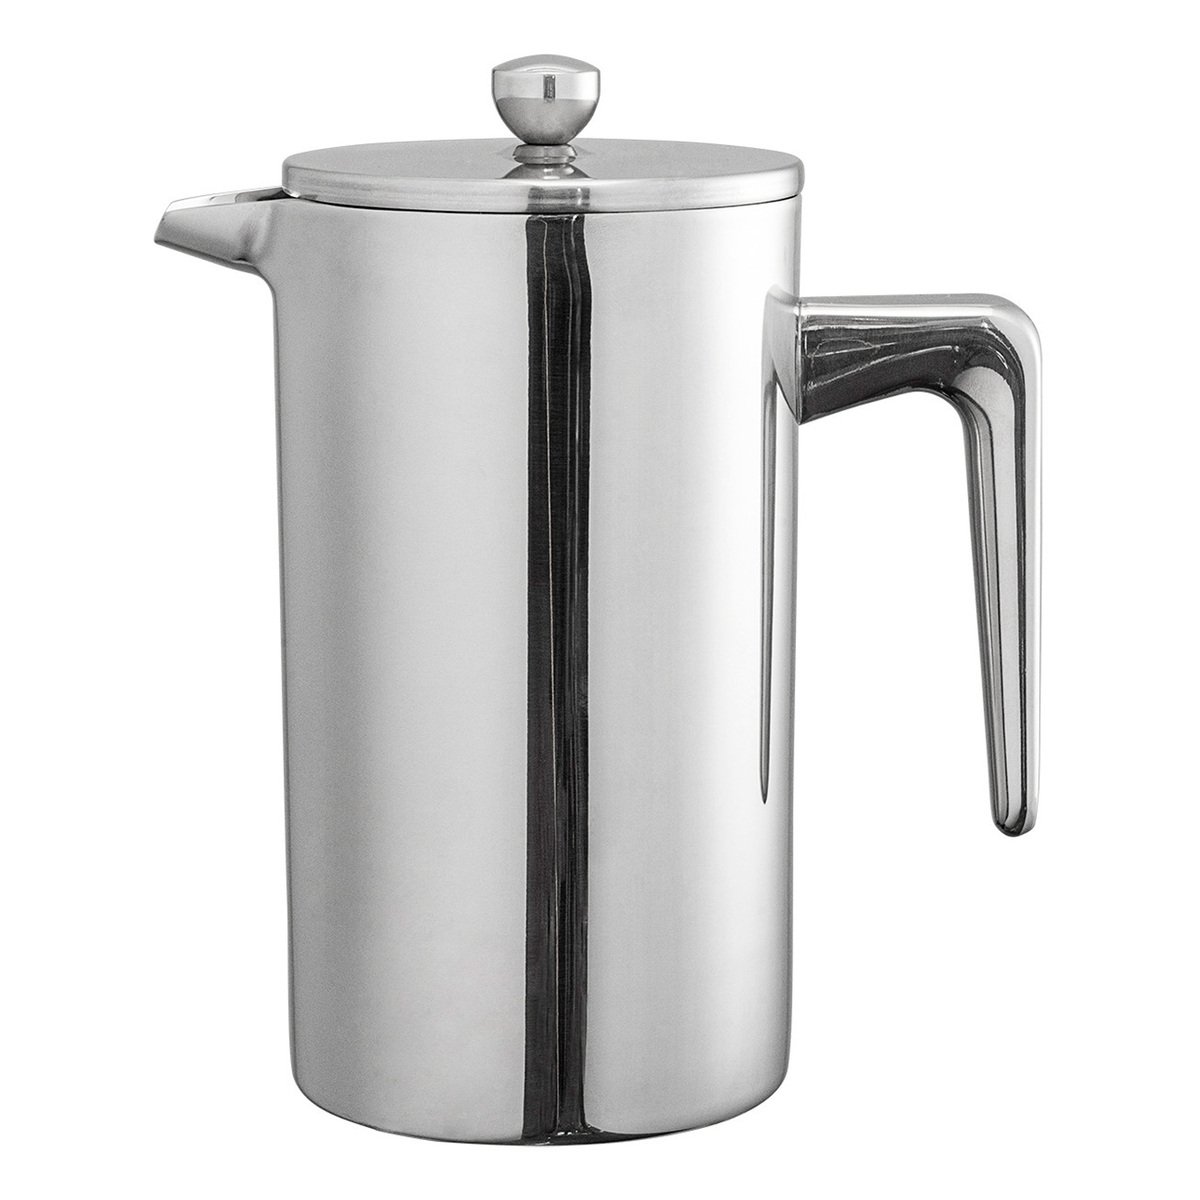 French Press Easy Brew and Clean Basket, Stainless Steel, 4